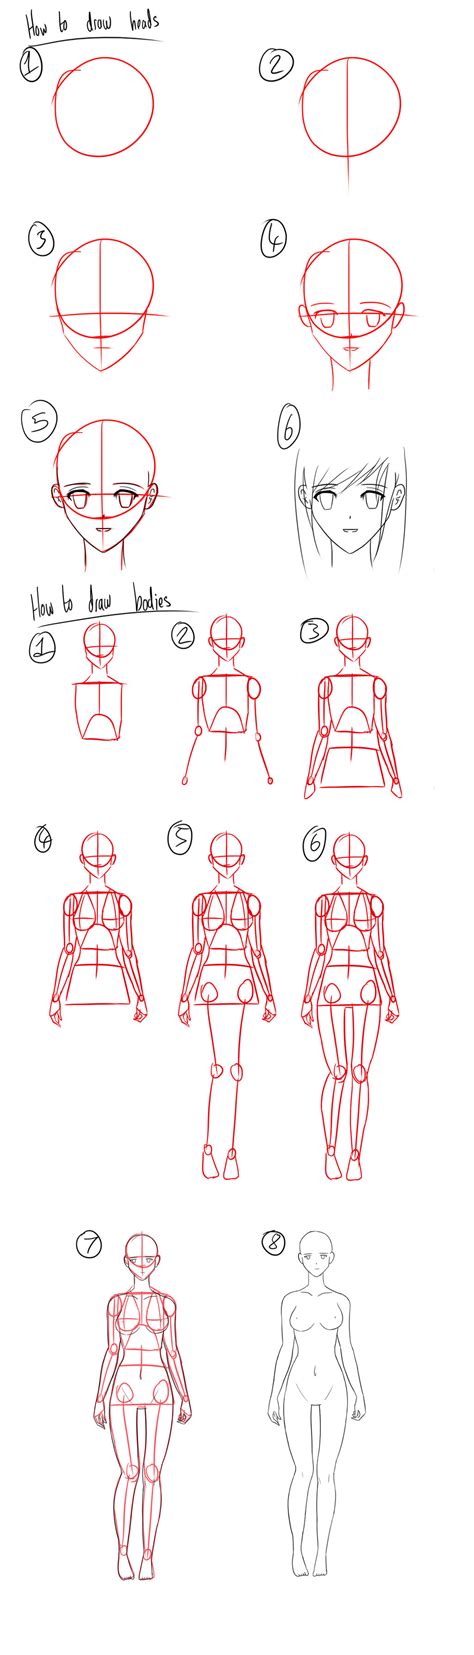 How To Draw A Nose Step By Step Anime Step By Step Draw An Anime